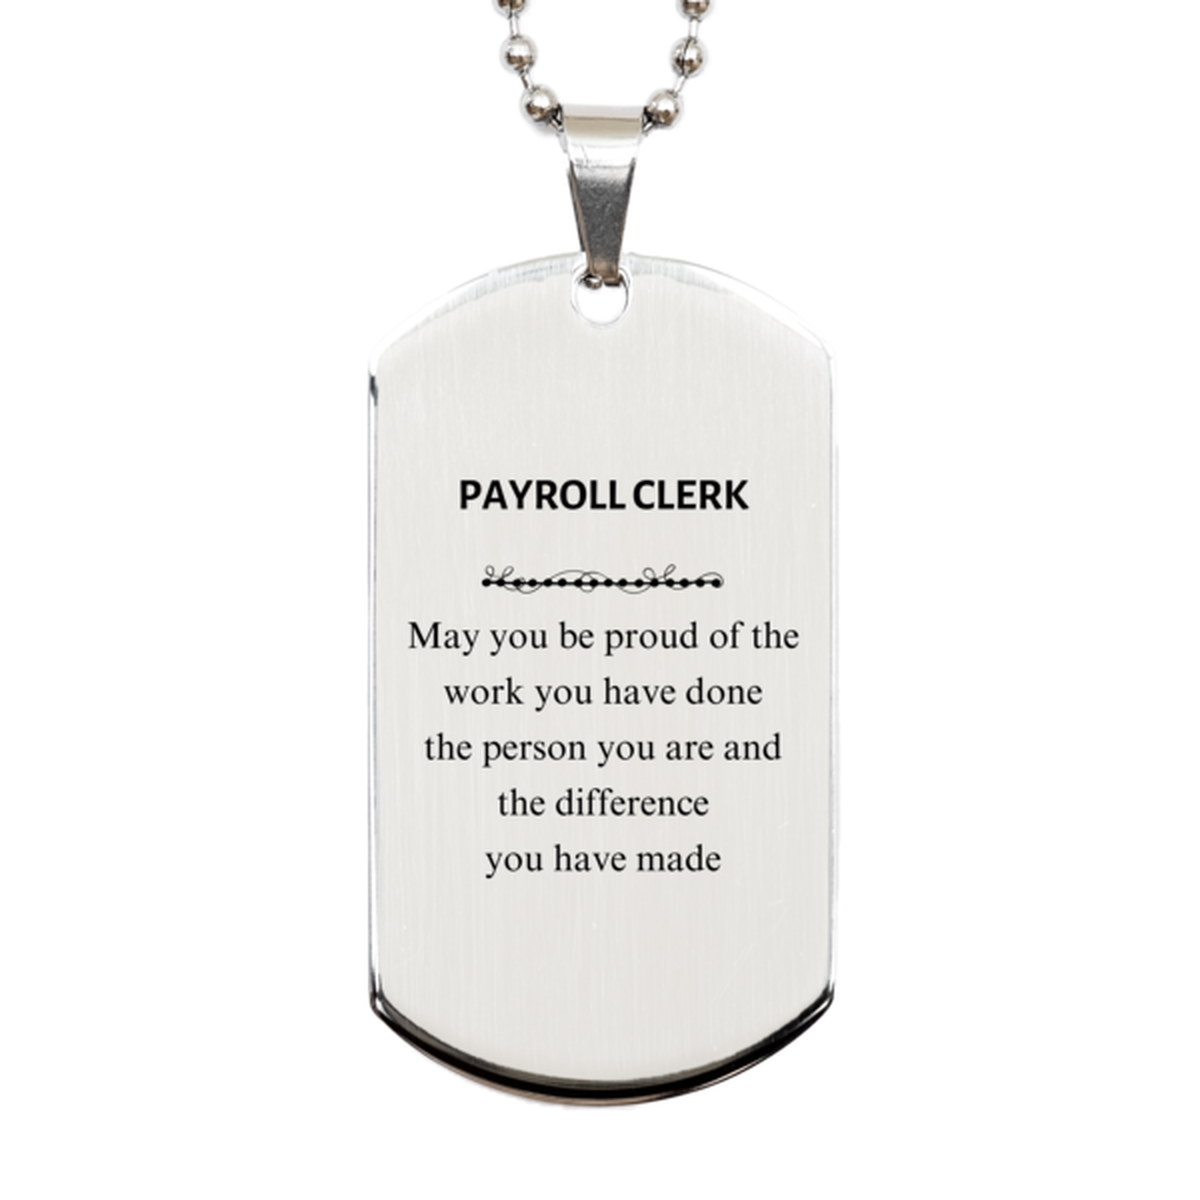 Payroll Clerk May you be proud of the work you have done, Retirement Payroll Clerk Silver Dog Tag for Colleague Appreciation Gifts Amazing for Payroll Clerk